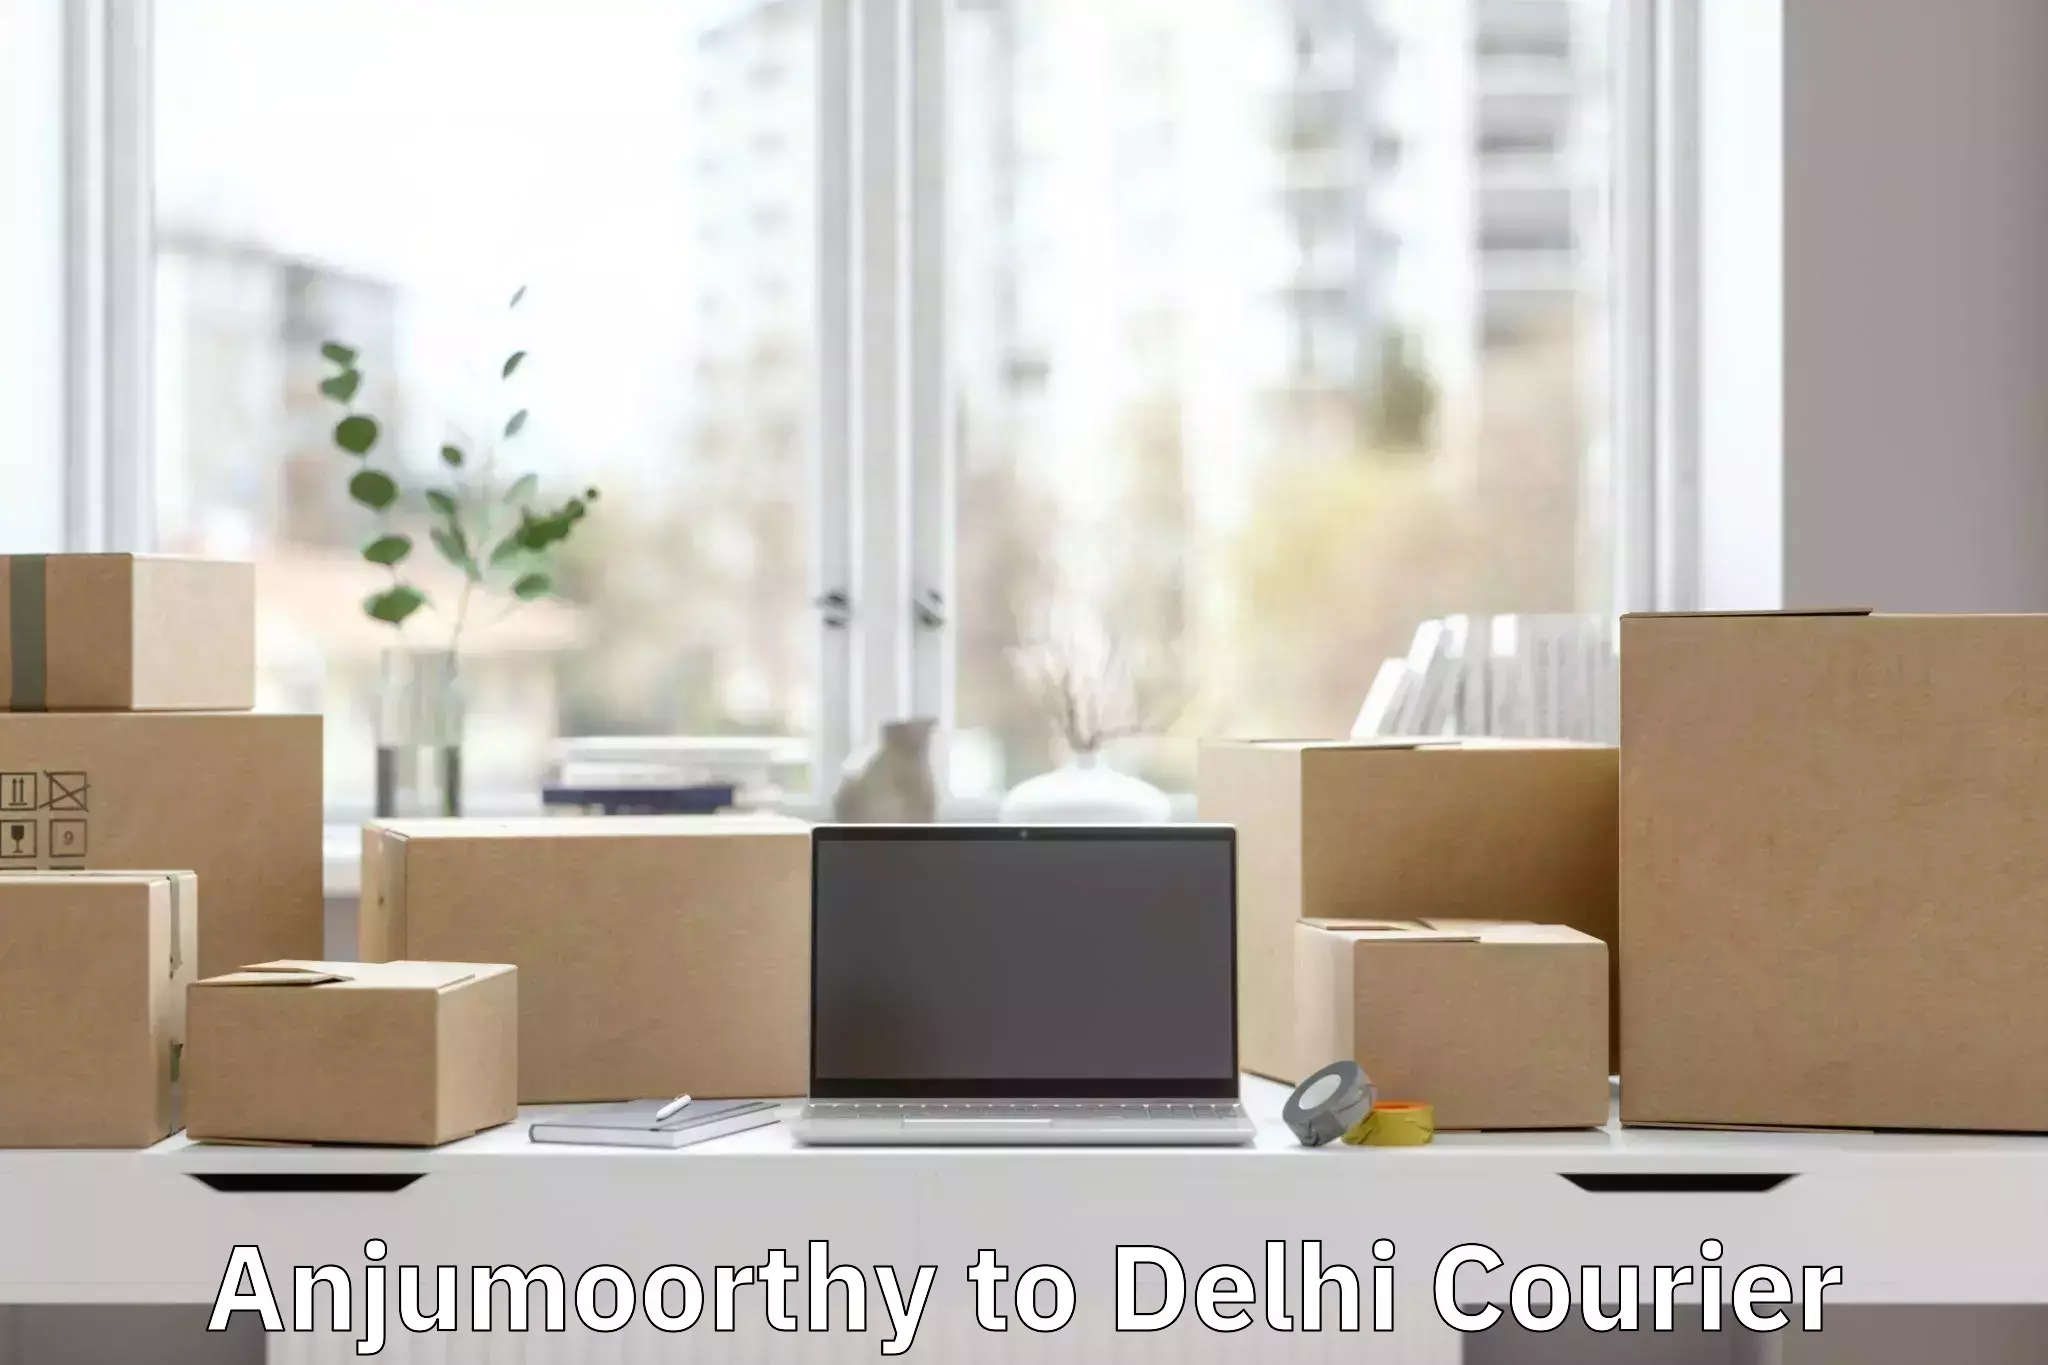 Online luggage shipping booking Anjumoorthy to Lodhi Road